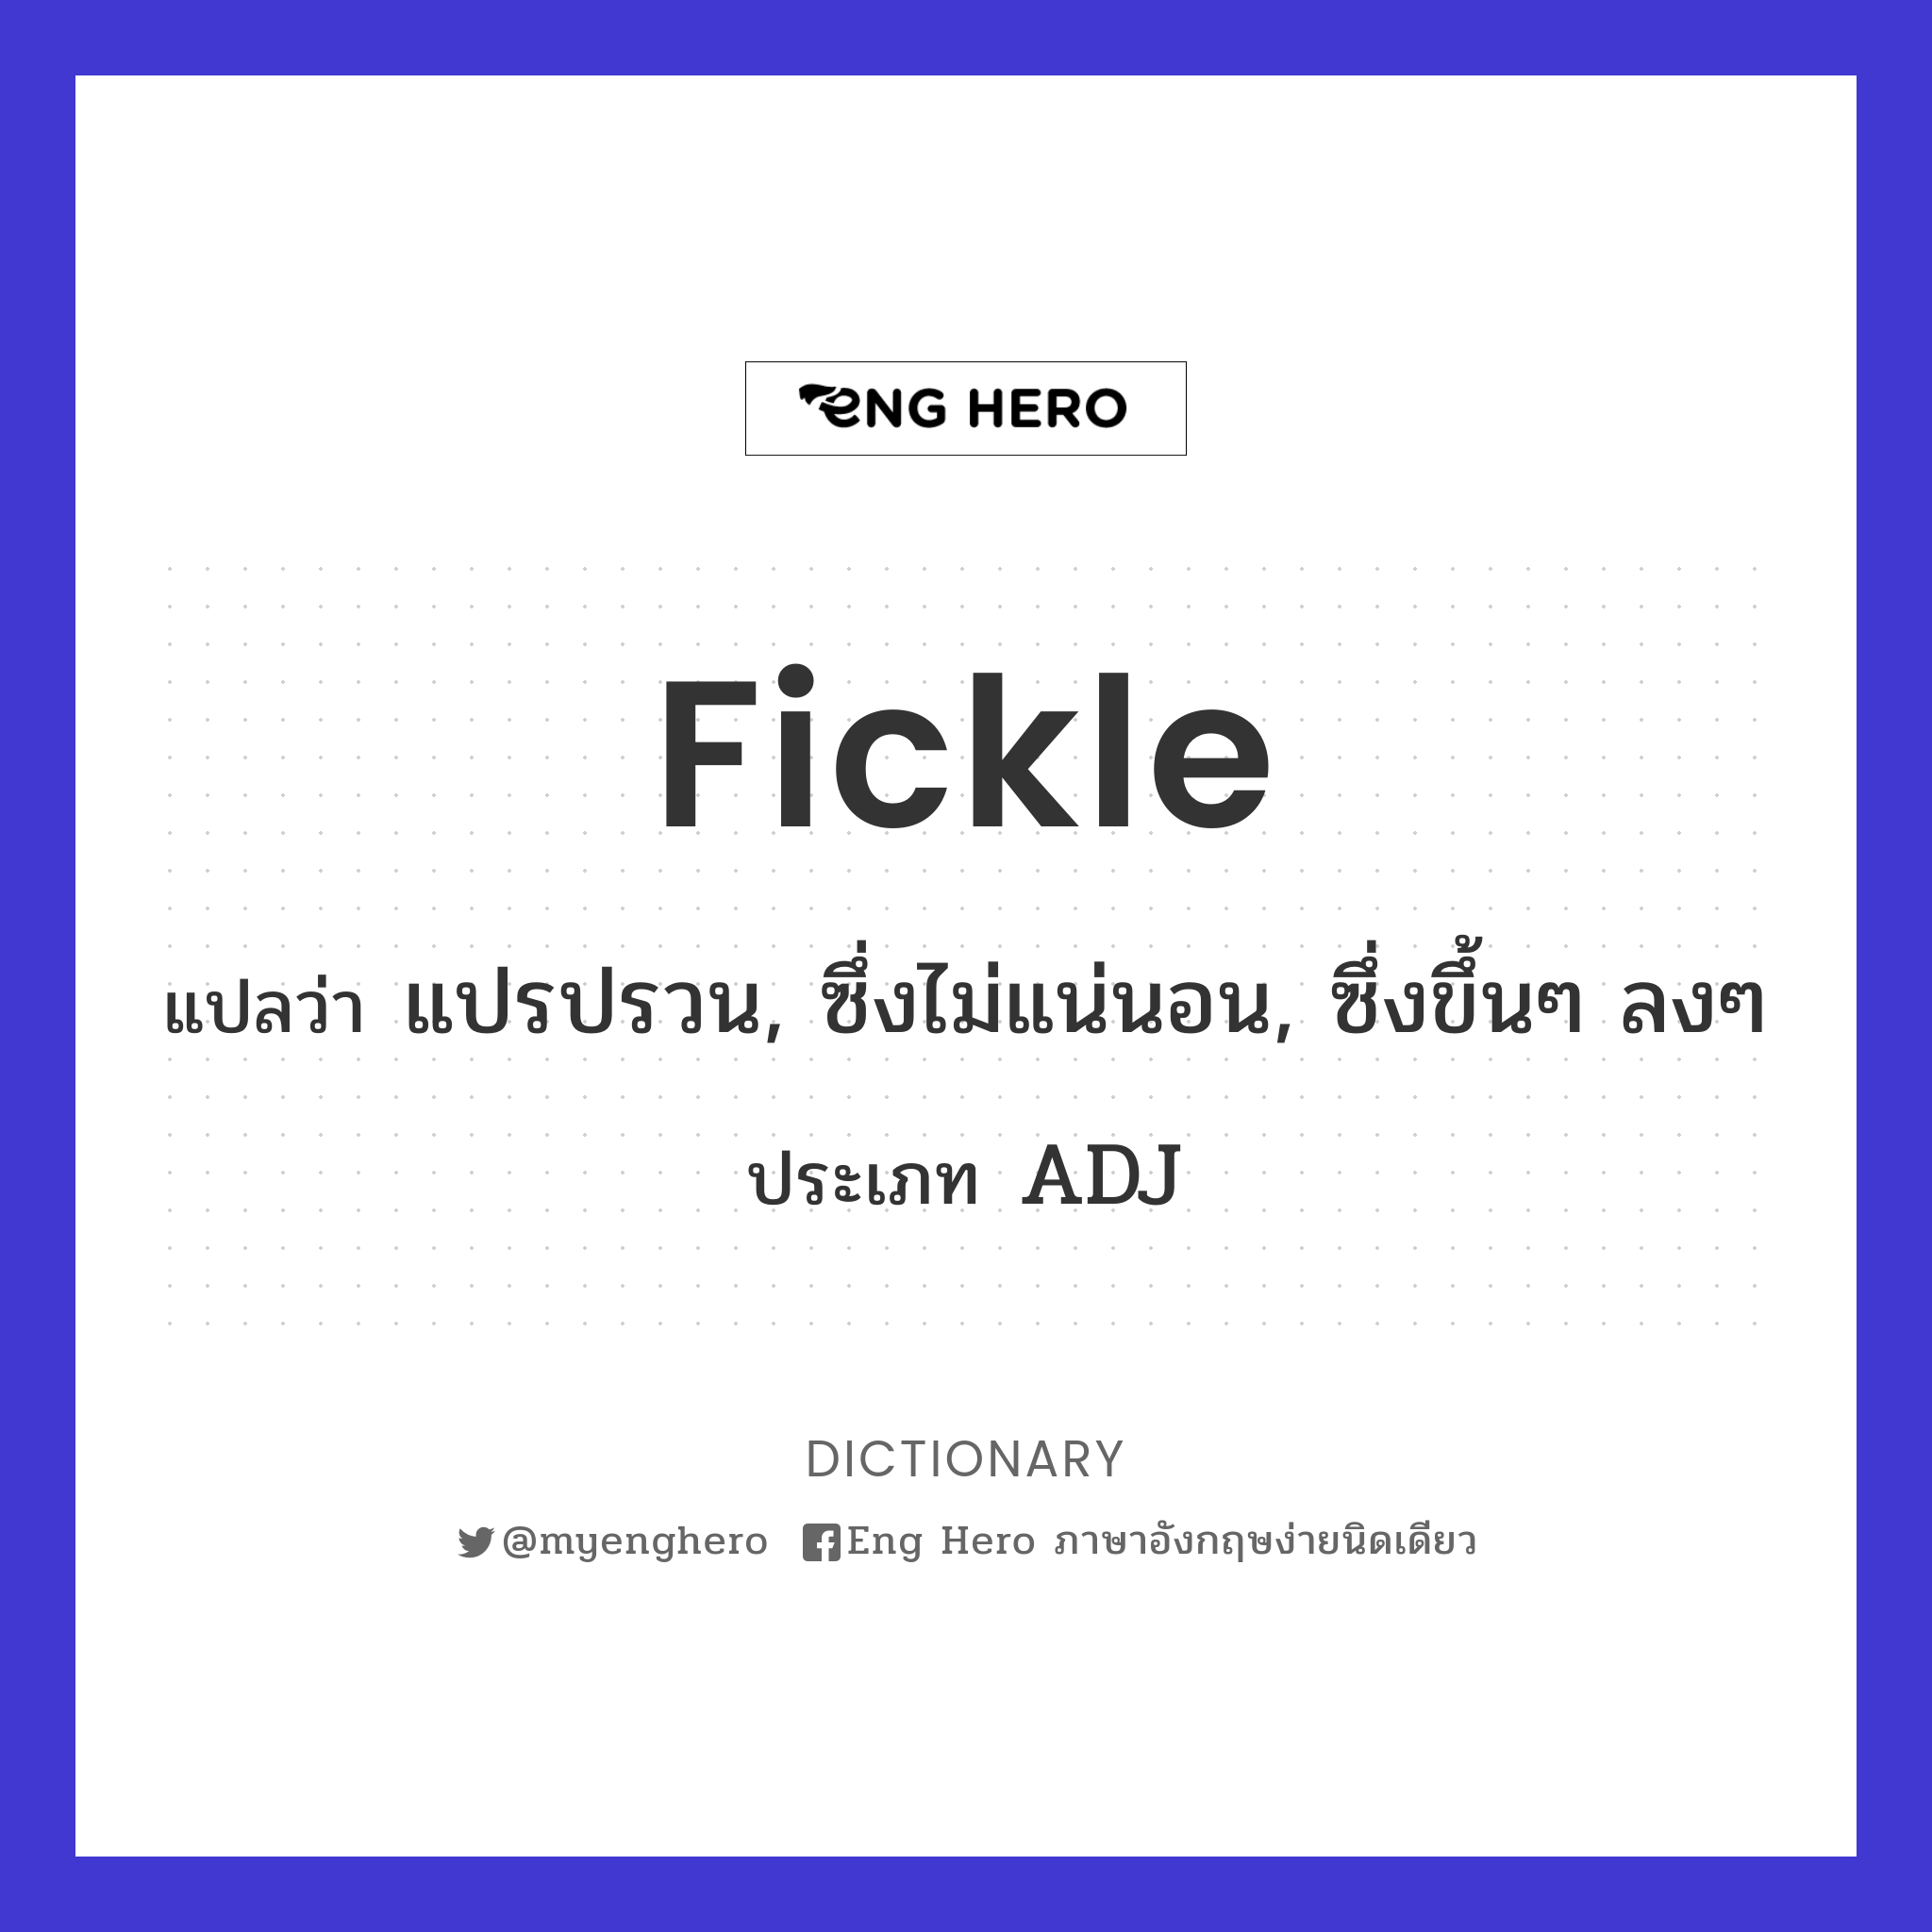 fickle